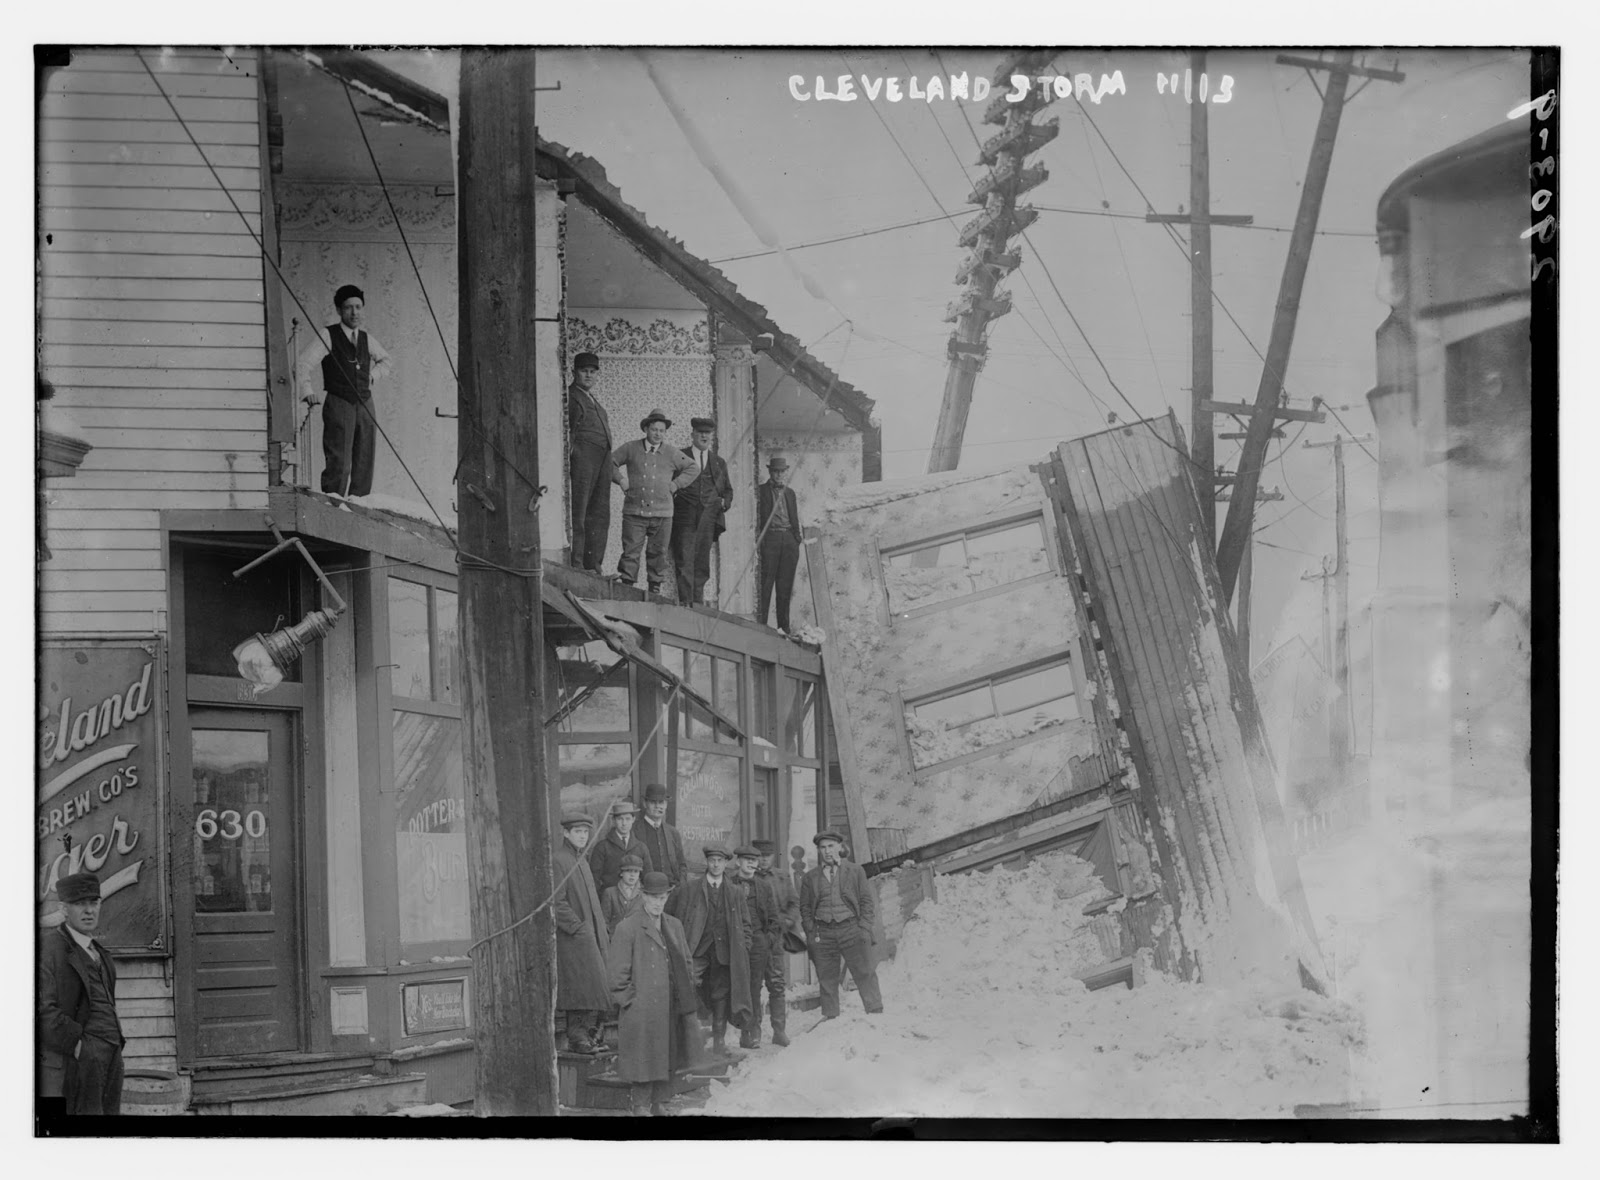 Could Such Tragedy Happen Today Reflections On The 100 Year Anniversary Of The Epic Great Lakes Storm Of 1913 University Of Minnesota Press Blog